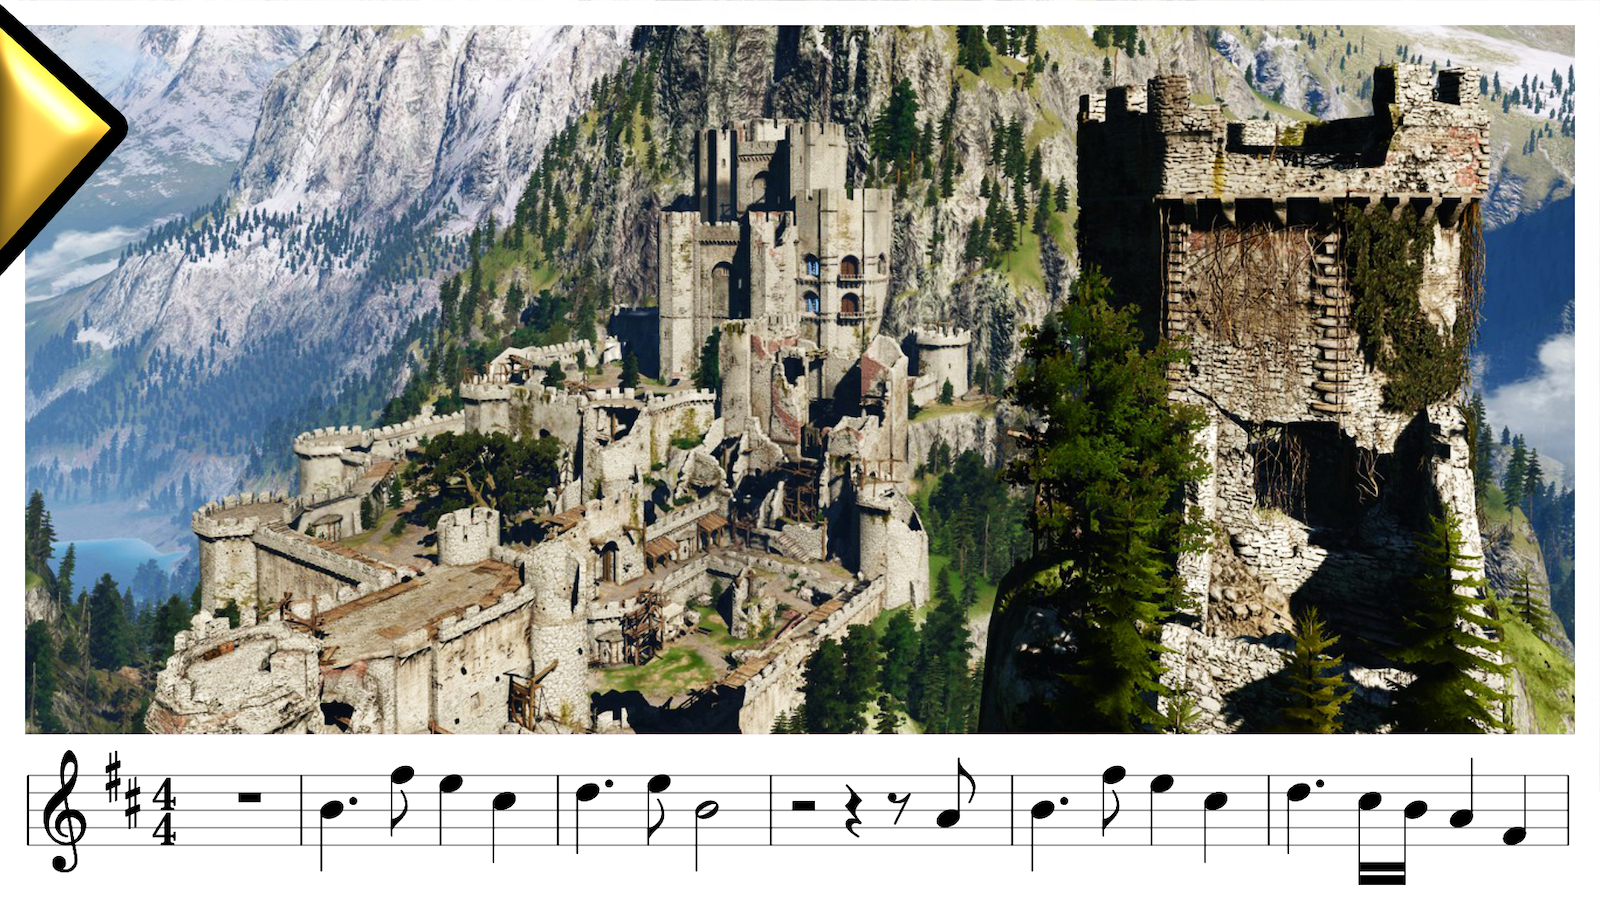 The witcher 3 soundtrack kaer morhen фото 15